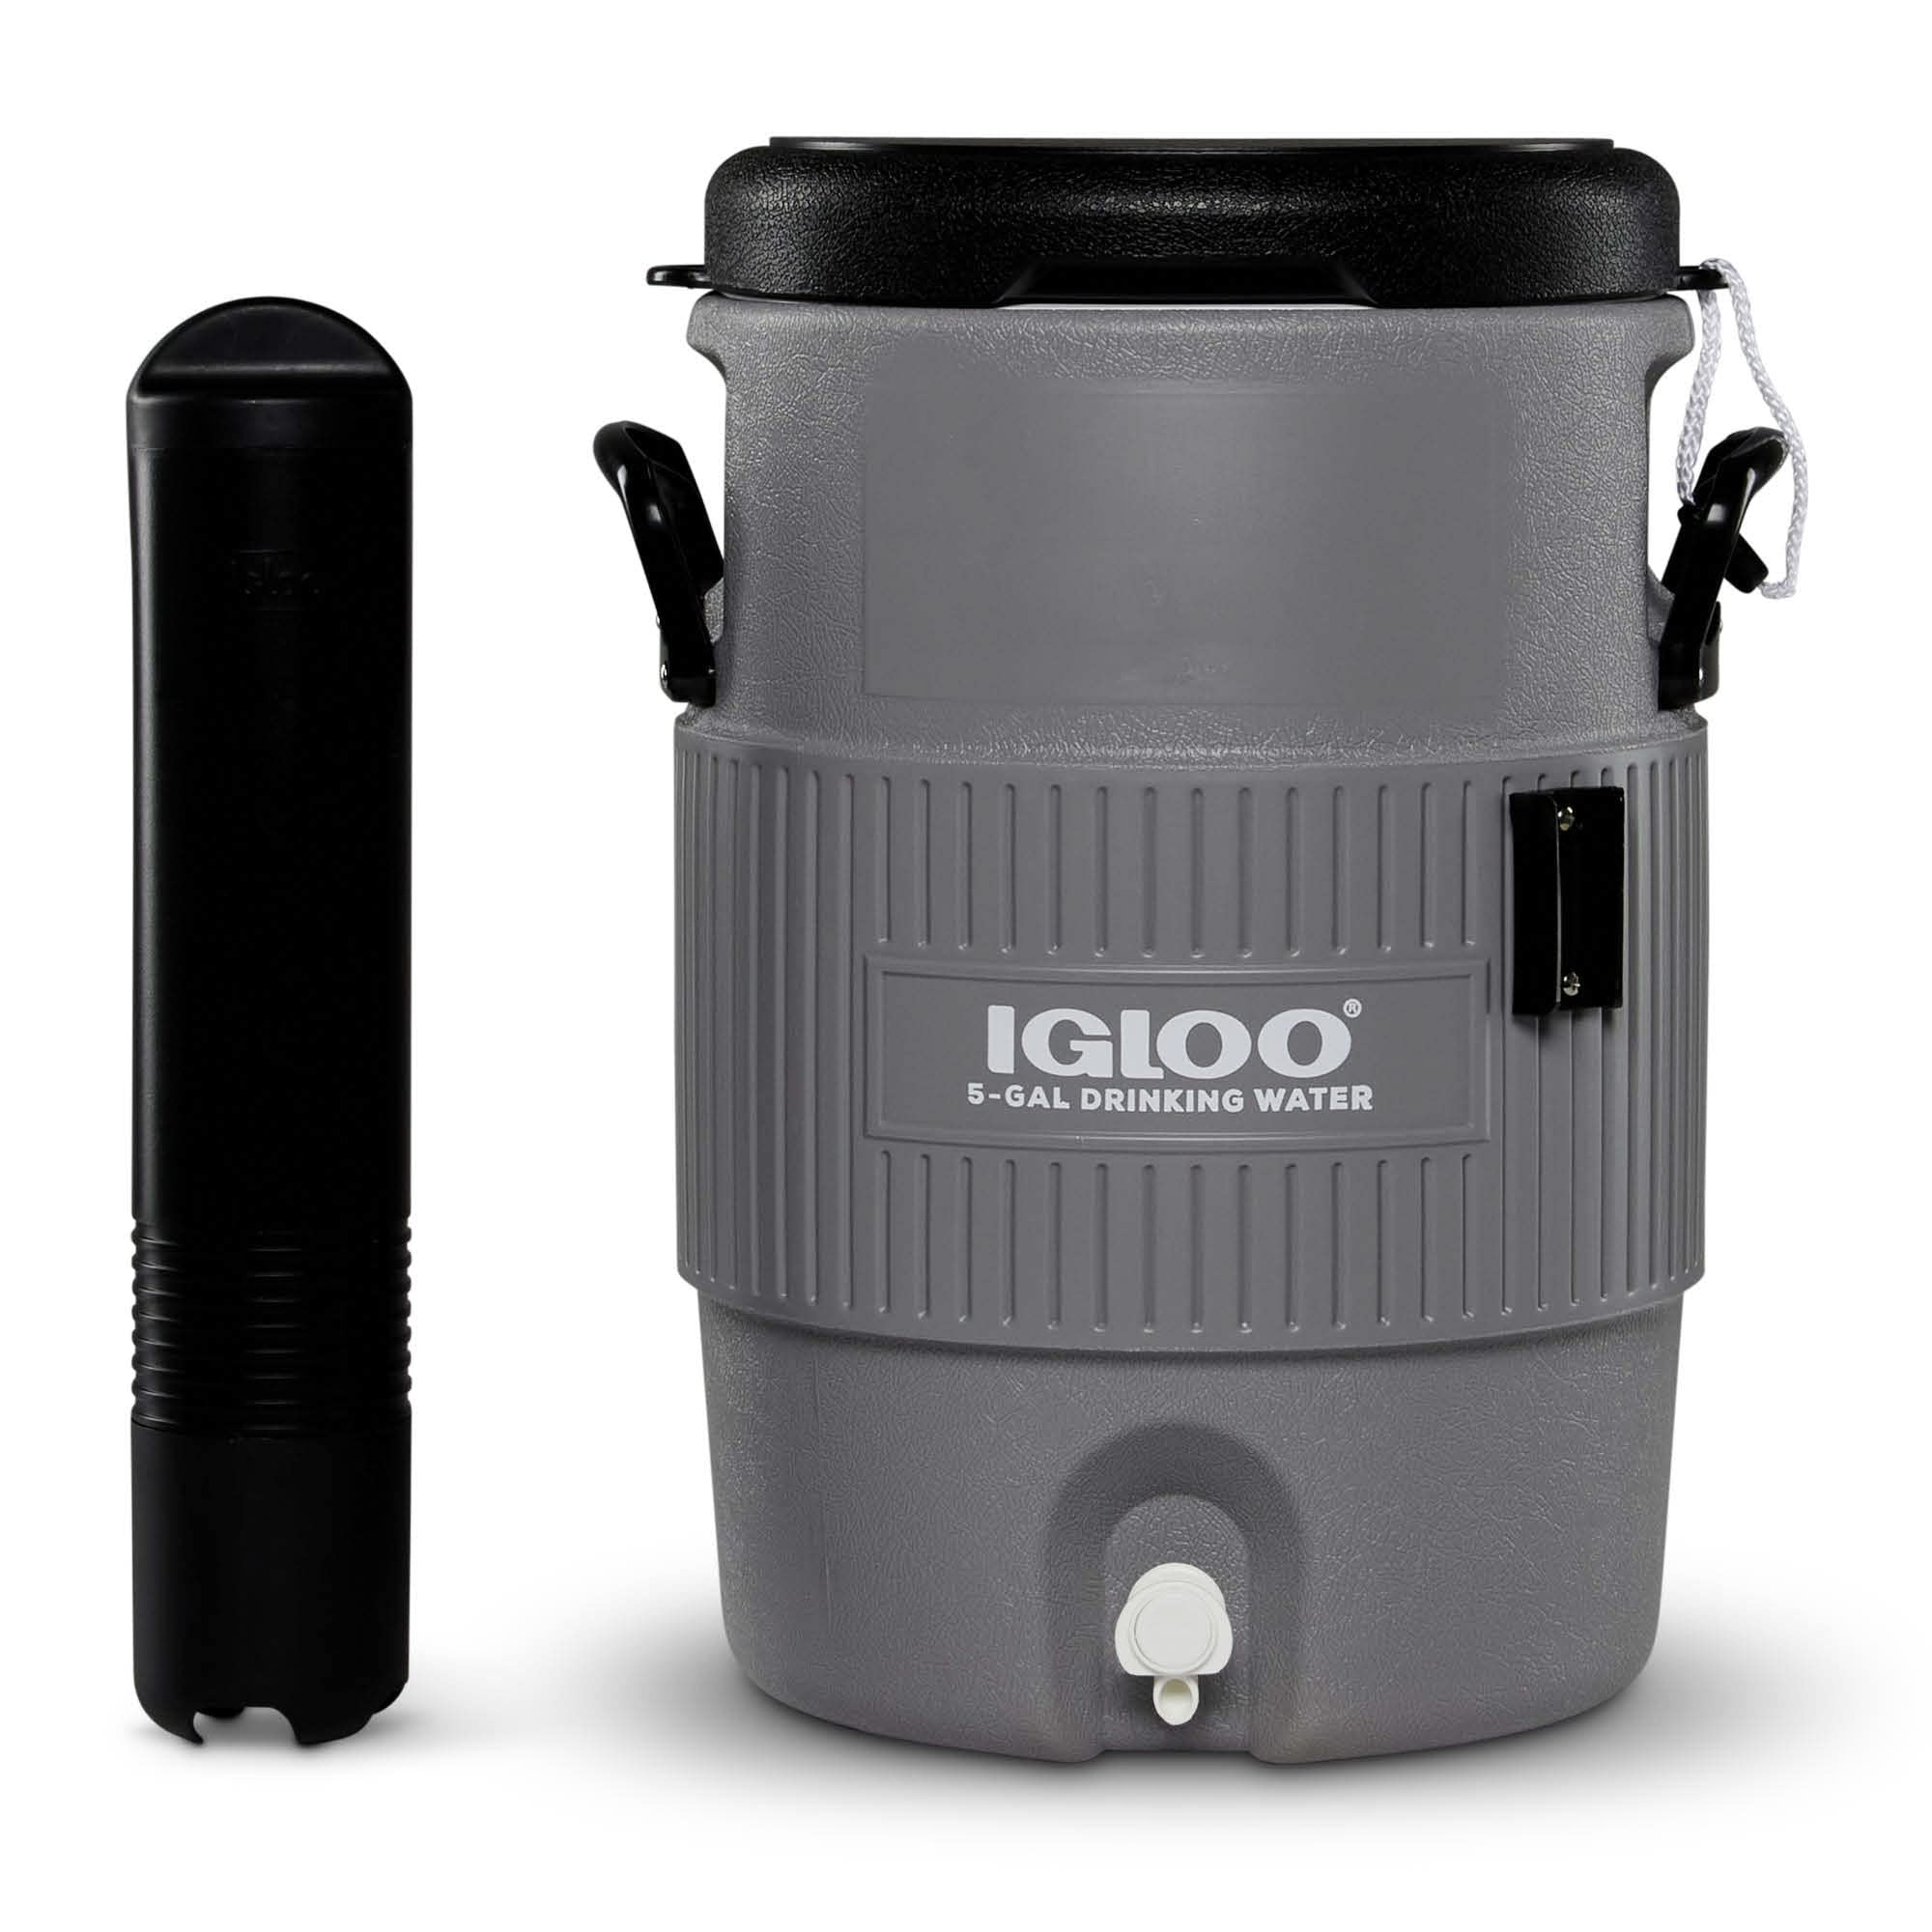 5-Gallon Igloo Portable Sports Cooler Water Beverage w/ Flat Seat Lid & Cup Dispenser (Gray) $30.15 + Free Shipping w/ Prime or on $35+